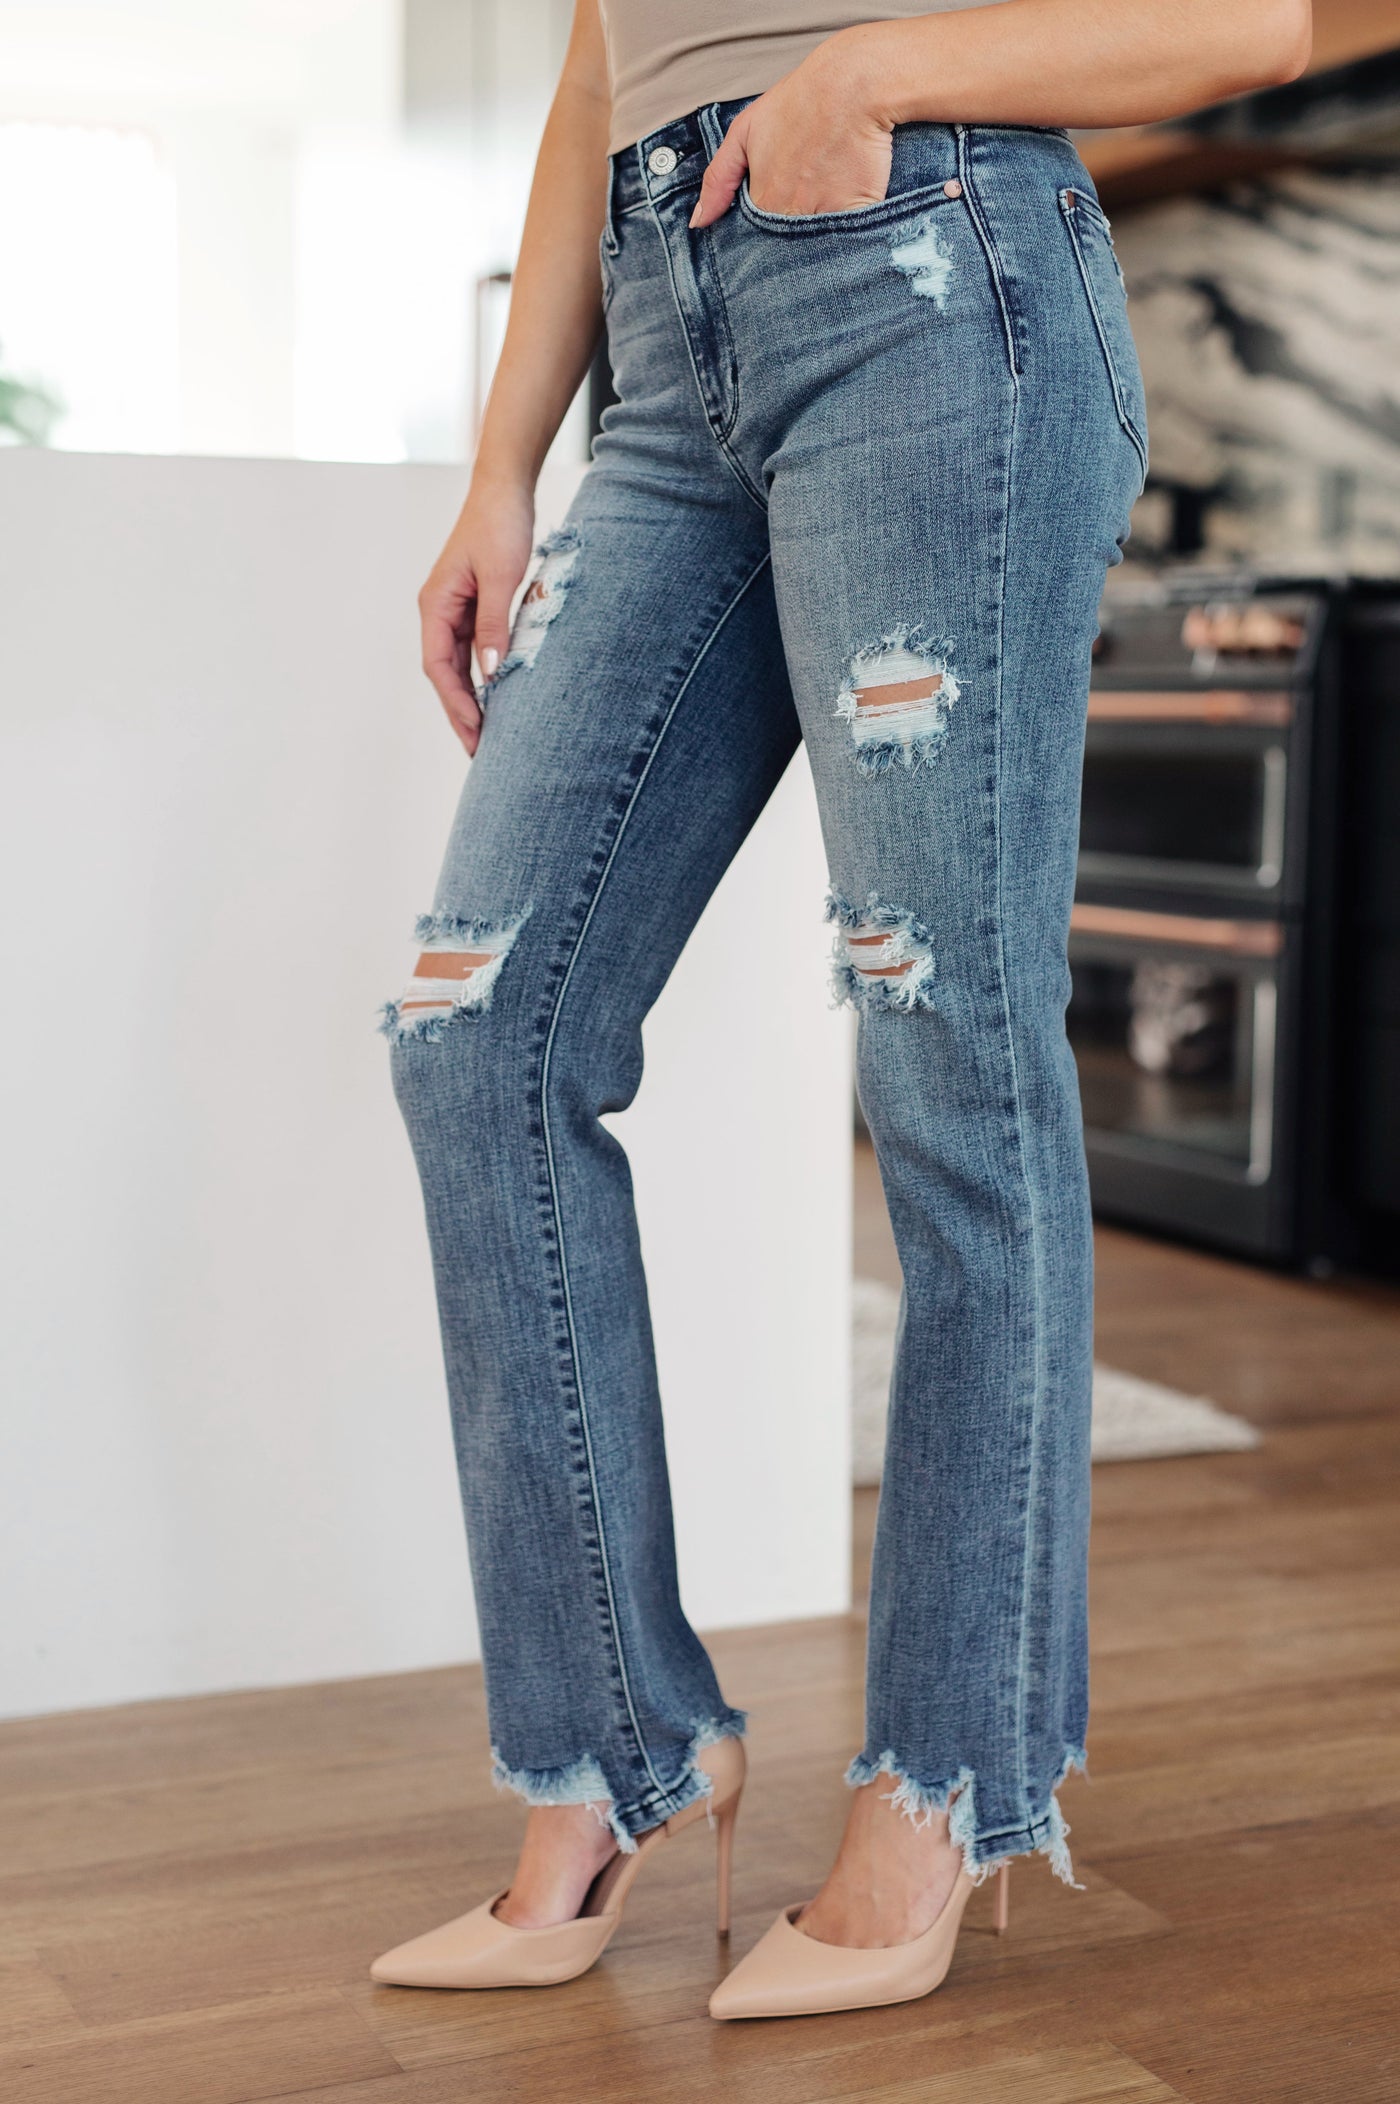 Judy Blue: Chi Town Mid Rise Destroyed Straight Jeans in Medium Wash